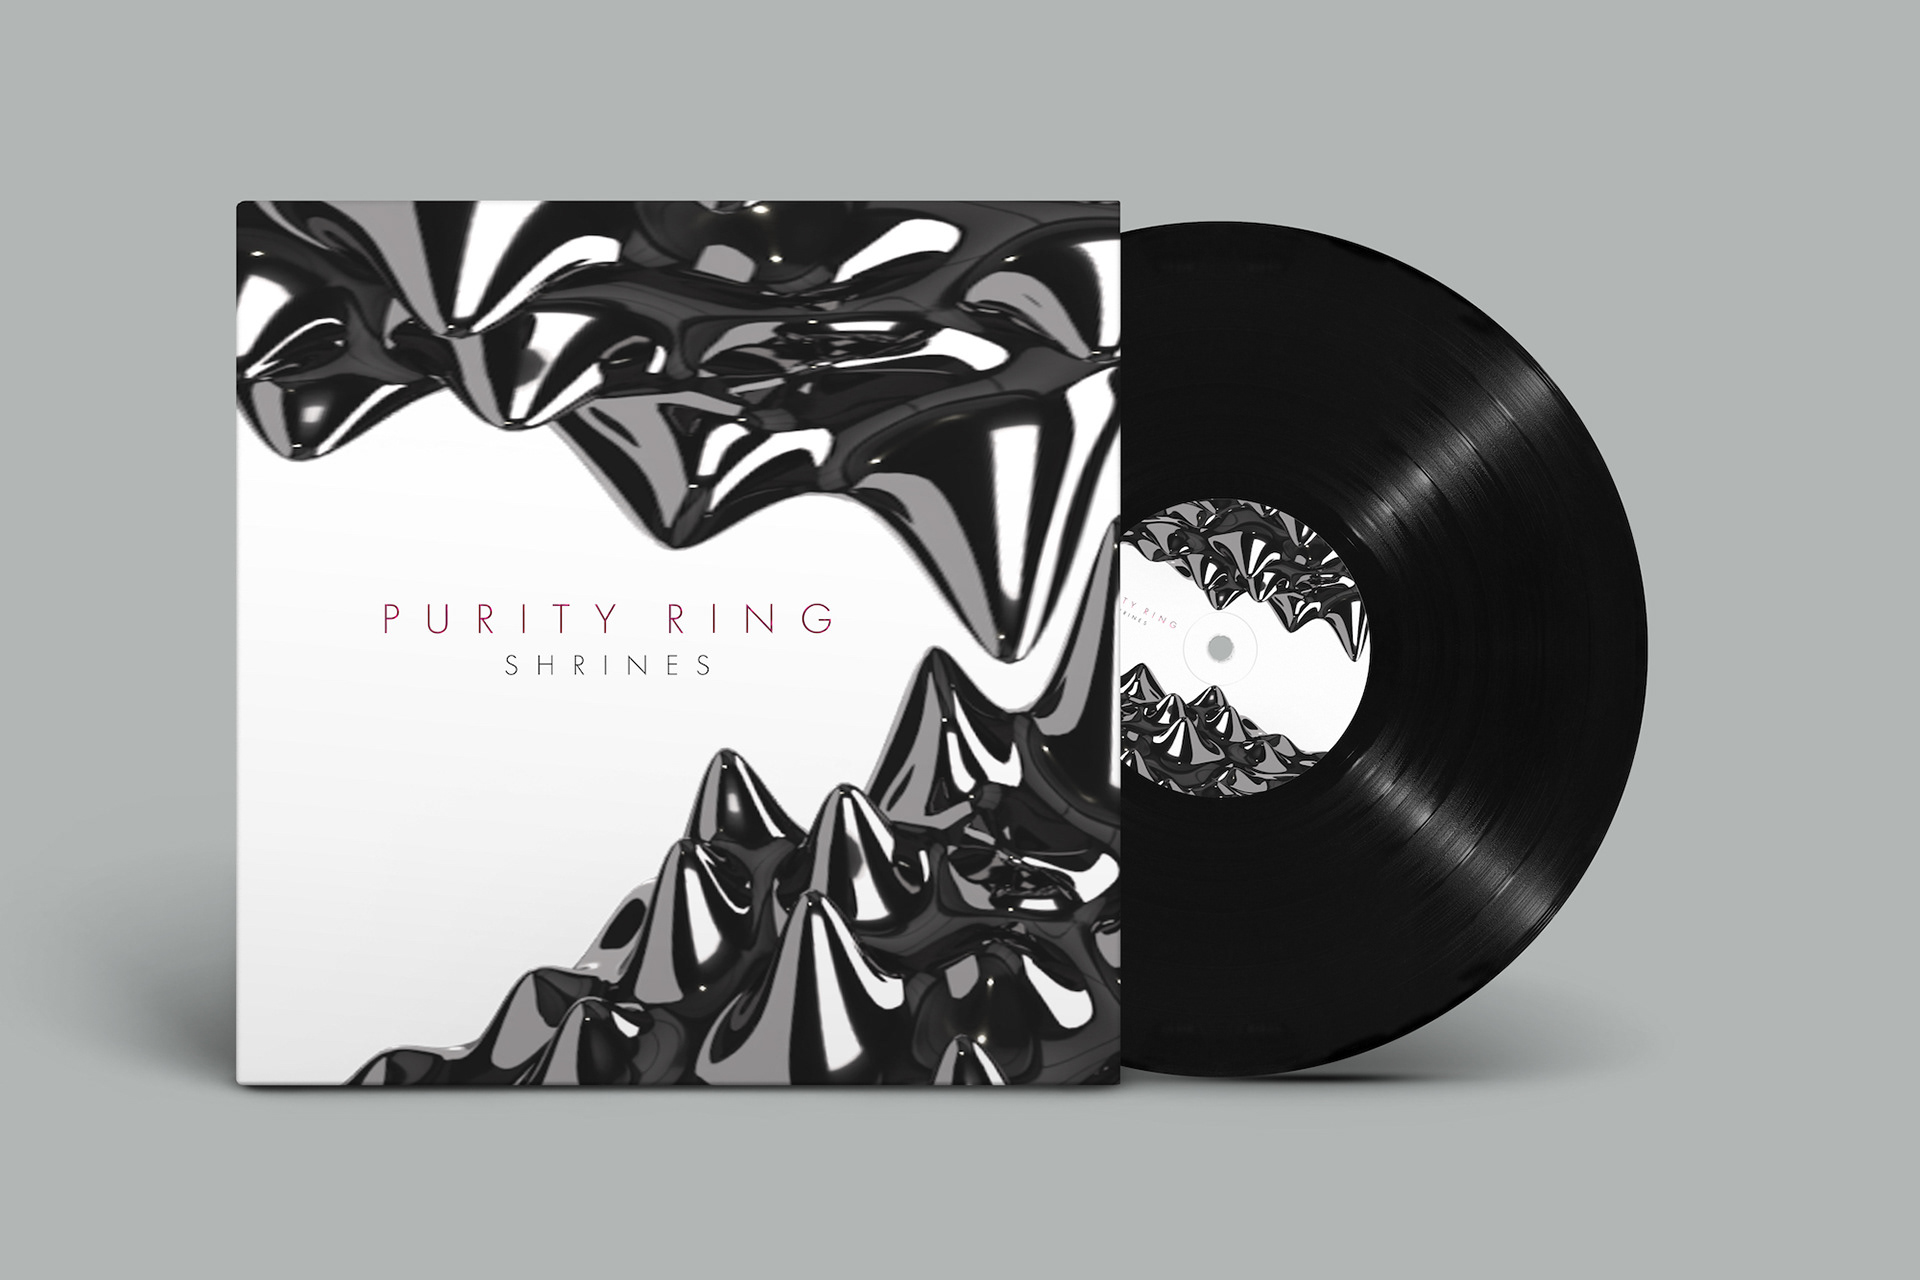 purity ring shrines